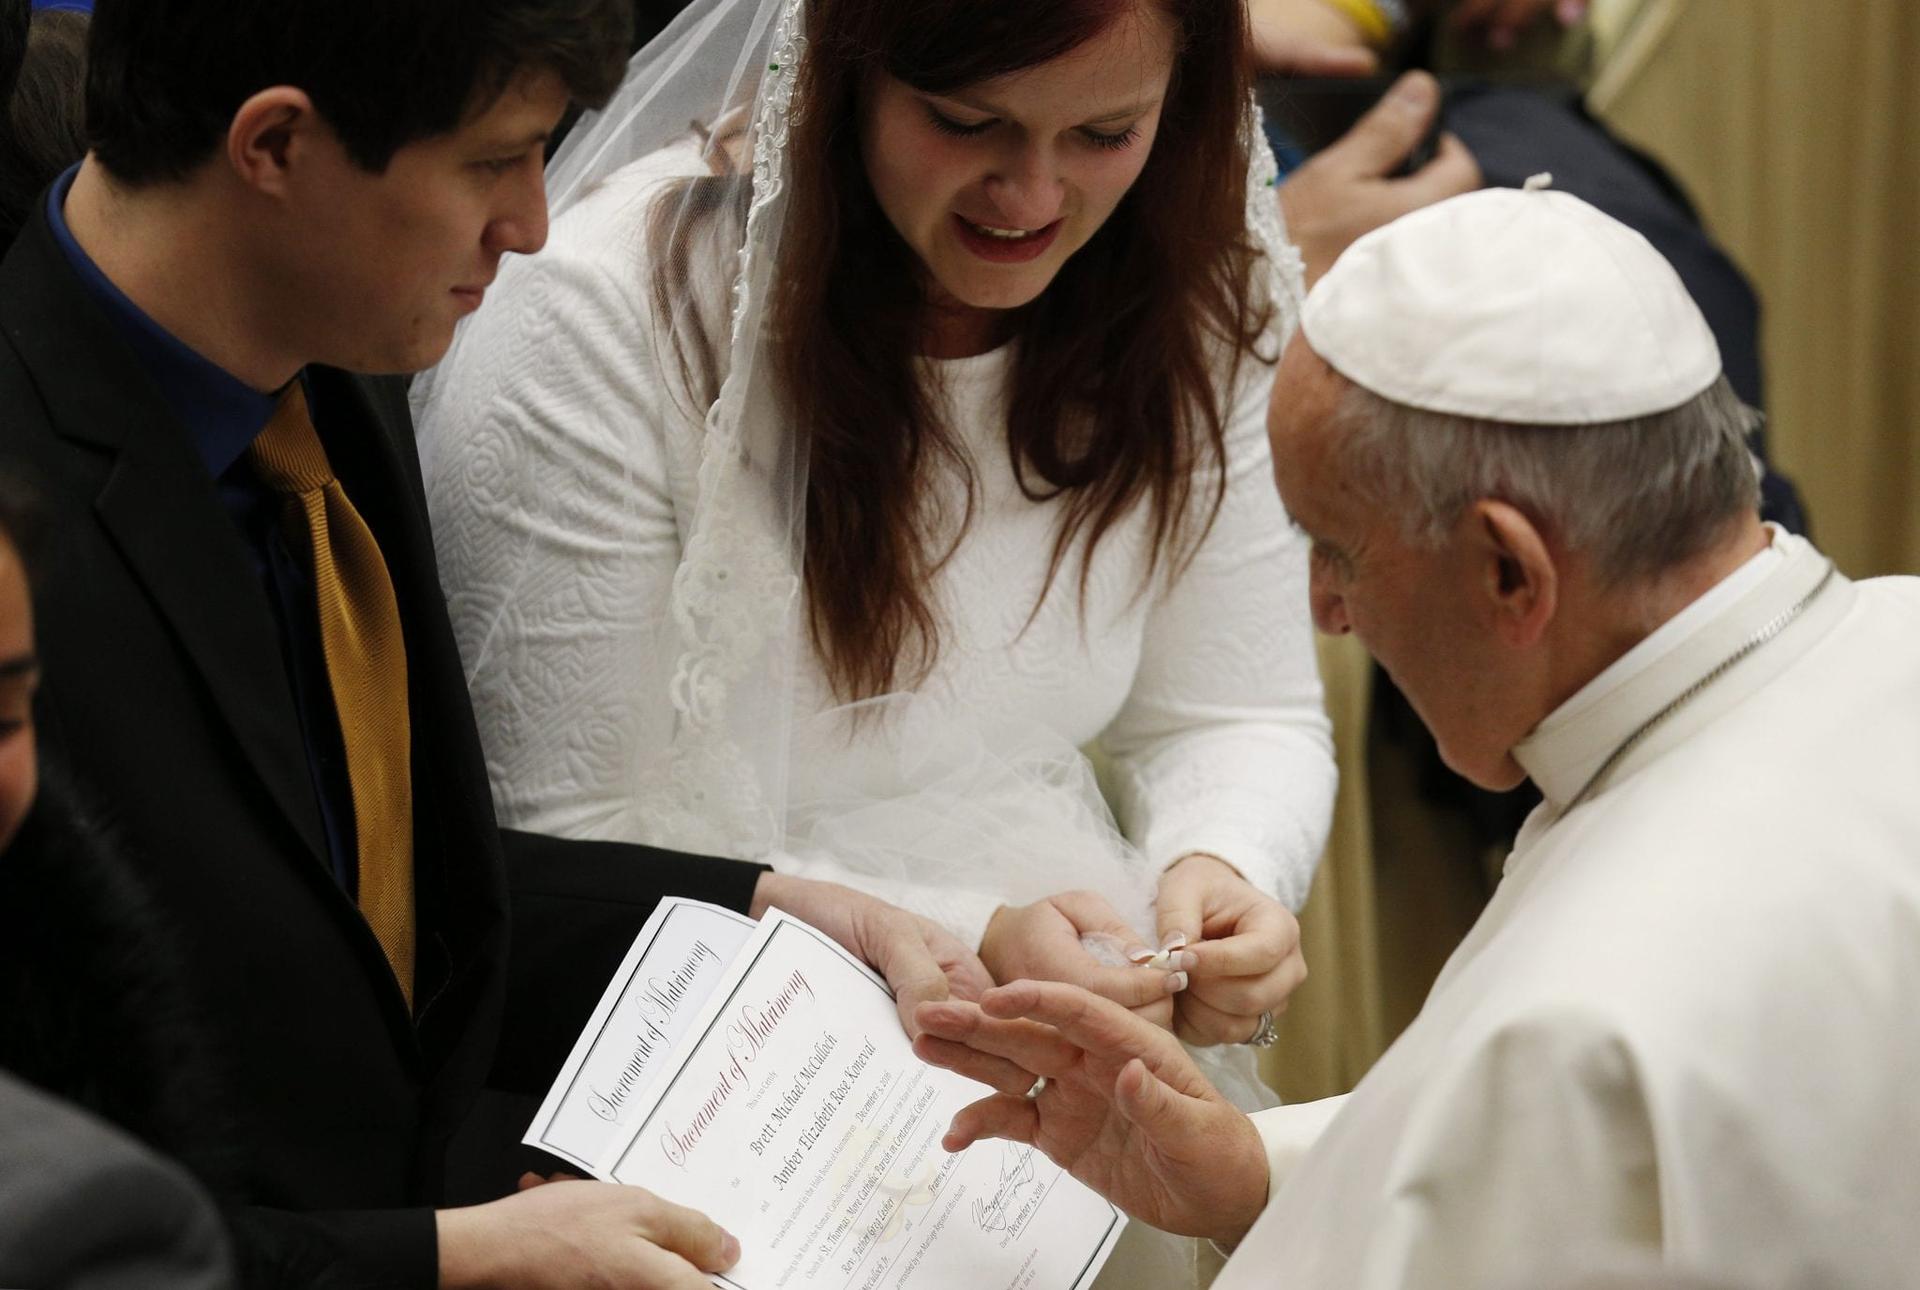 ‘Amoris Laetitia’: Are we seeing change by stealth?